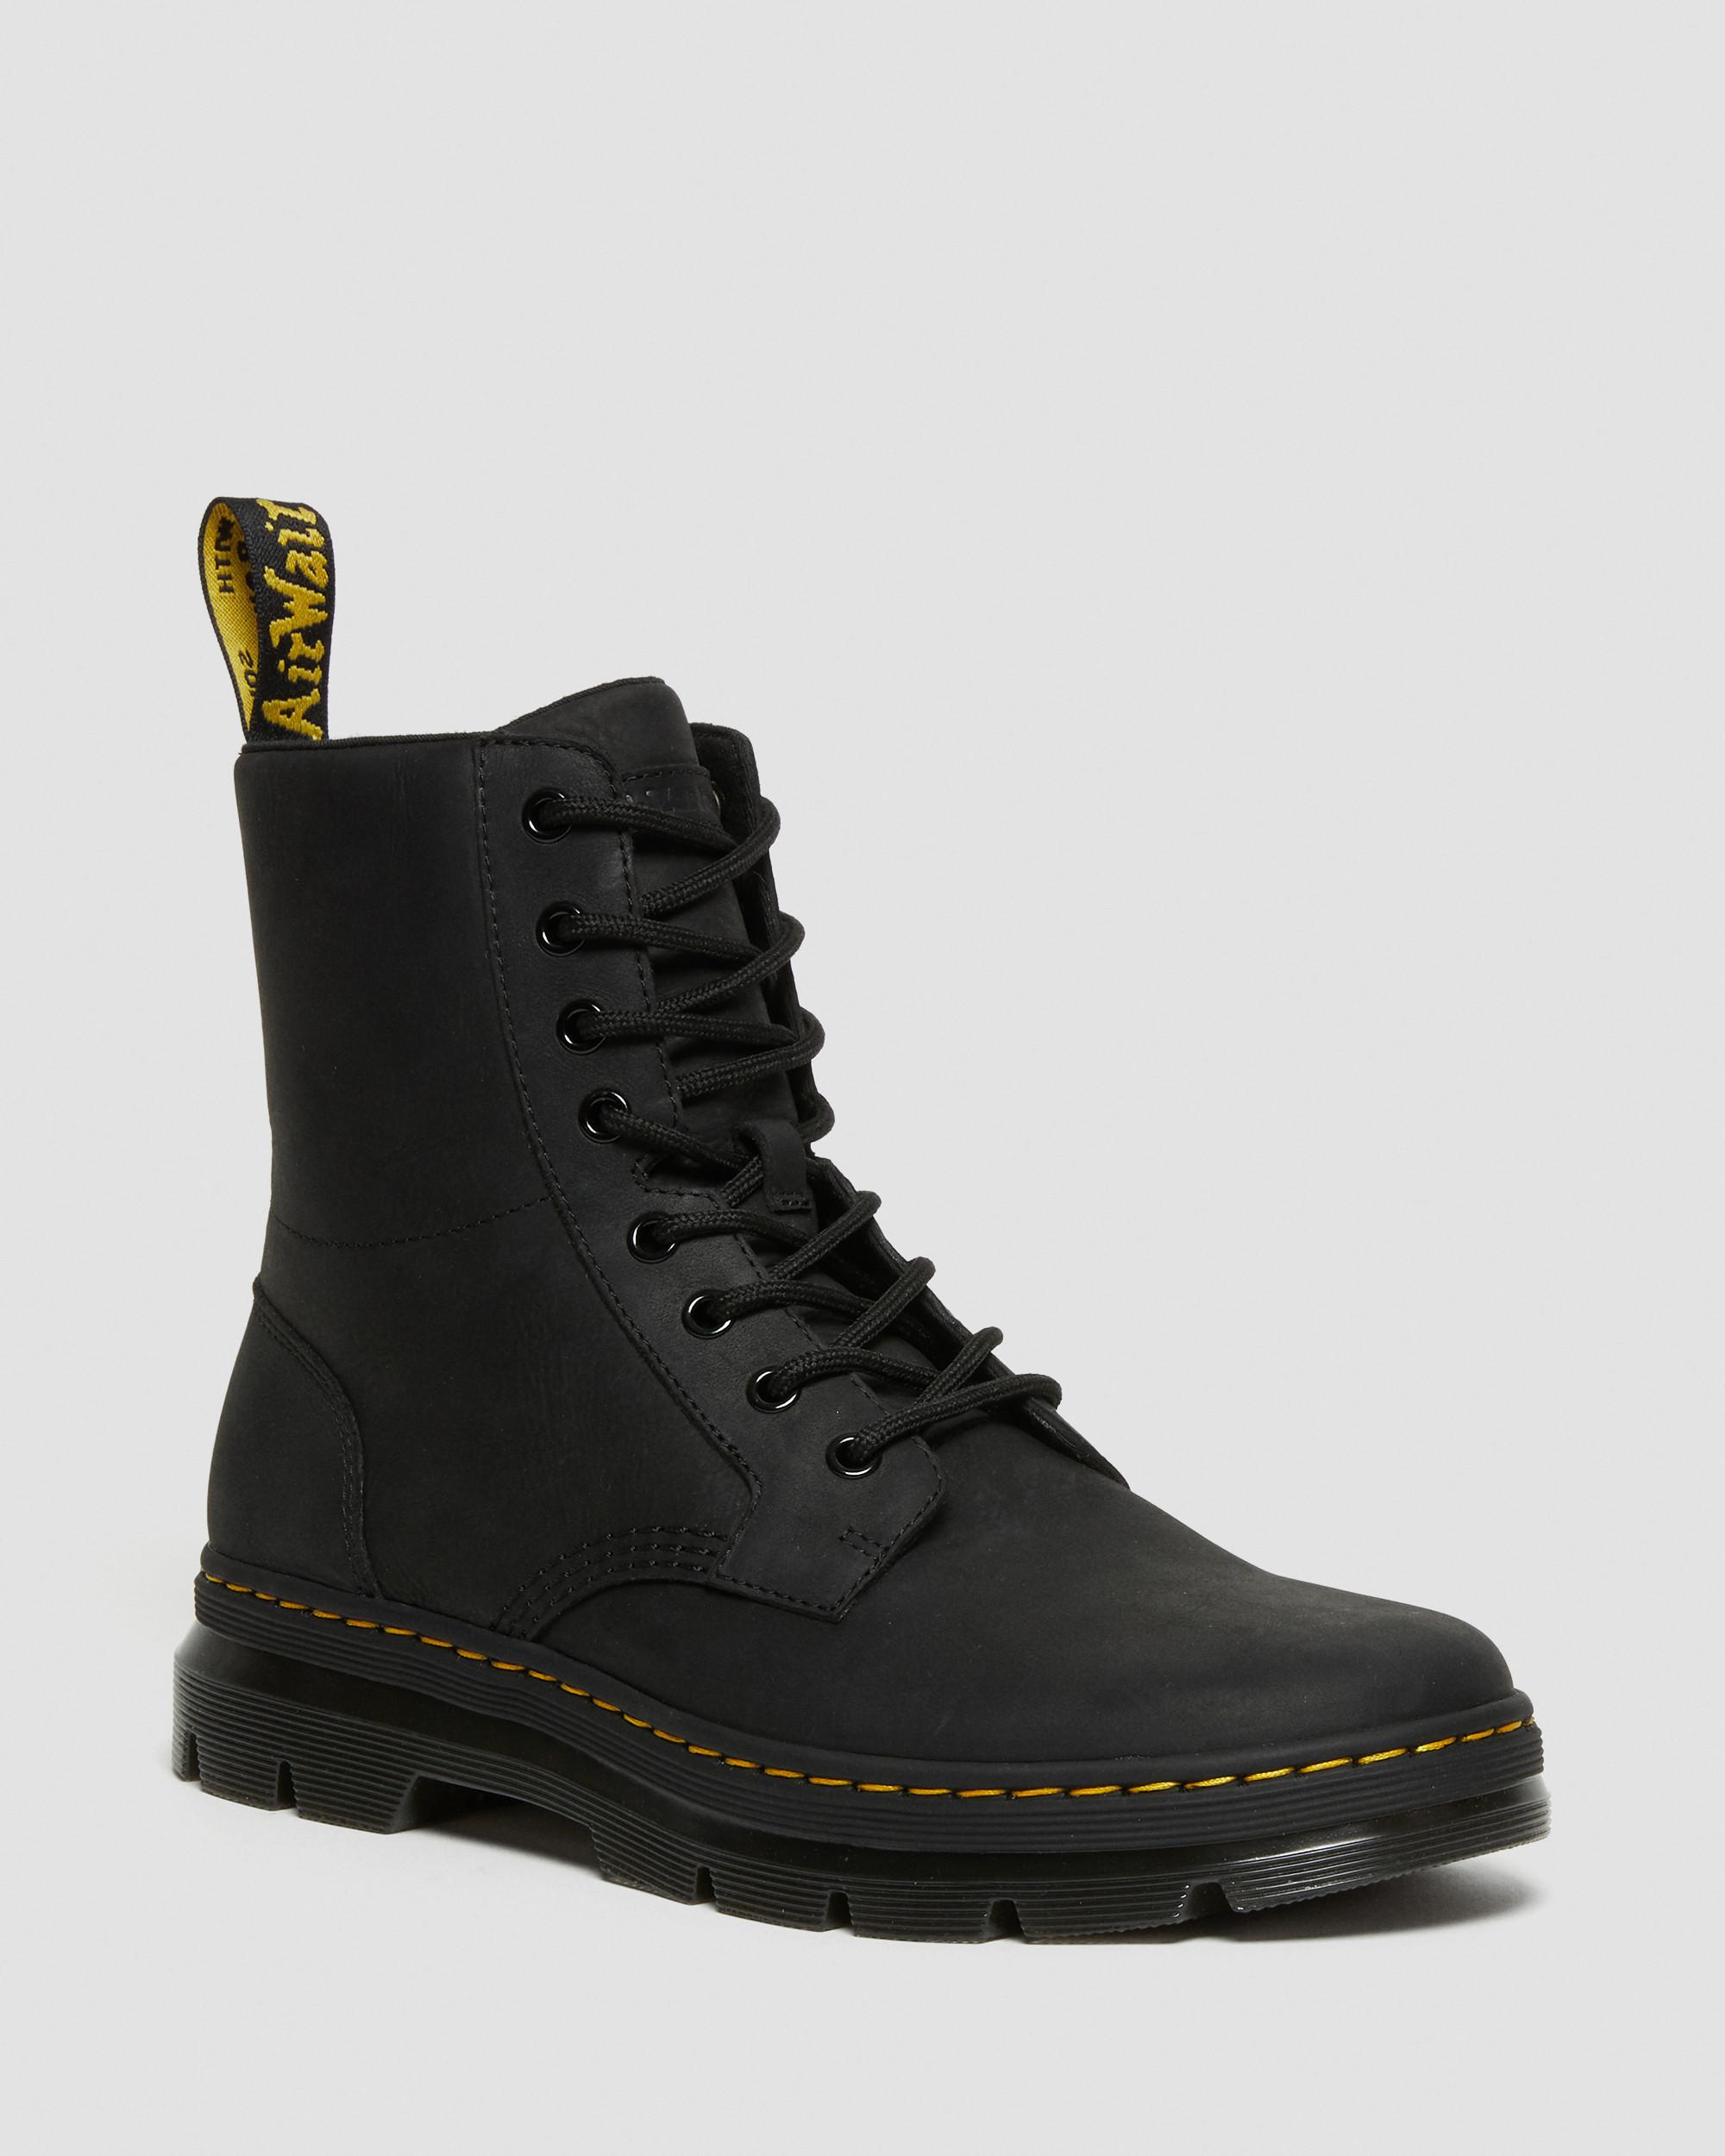 Dr Martens Airwair Black Boots With Bouncing Soles Kids size 13